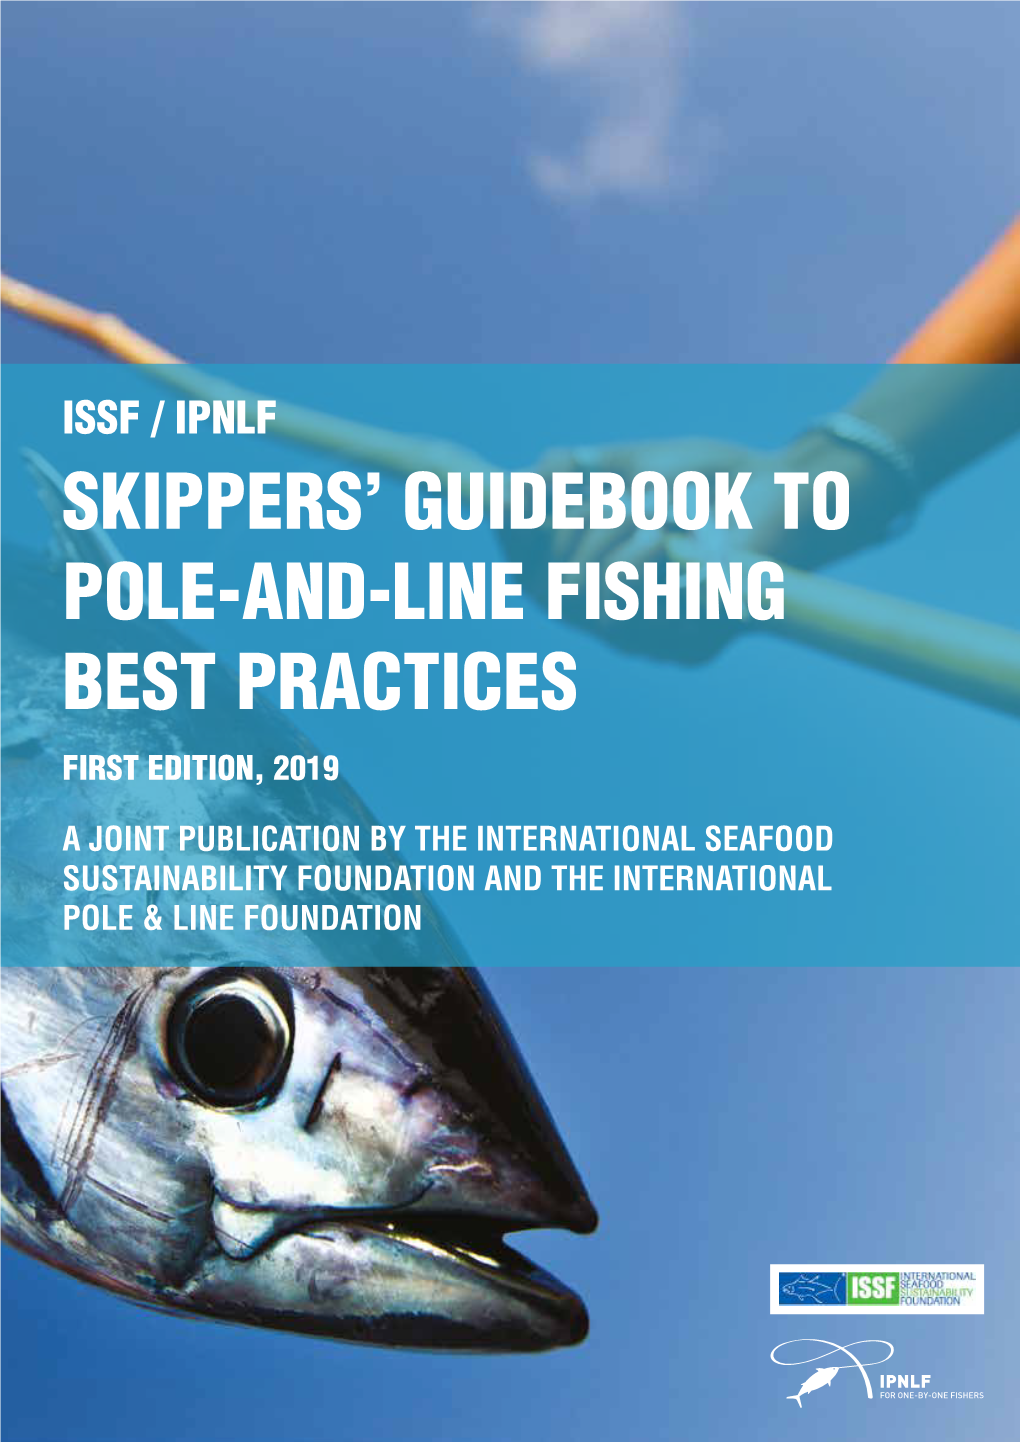 Issf / Ipnlf Skippers’ Guidebook to Pole-And-Line Fishing Best Practices First Edition, 2019